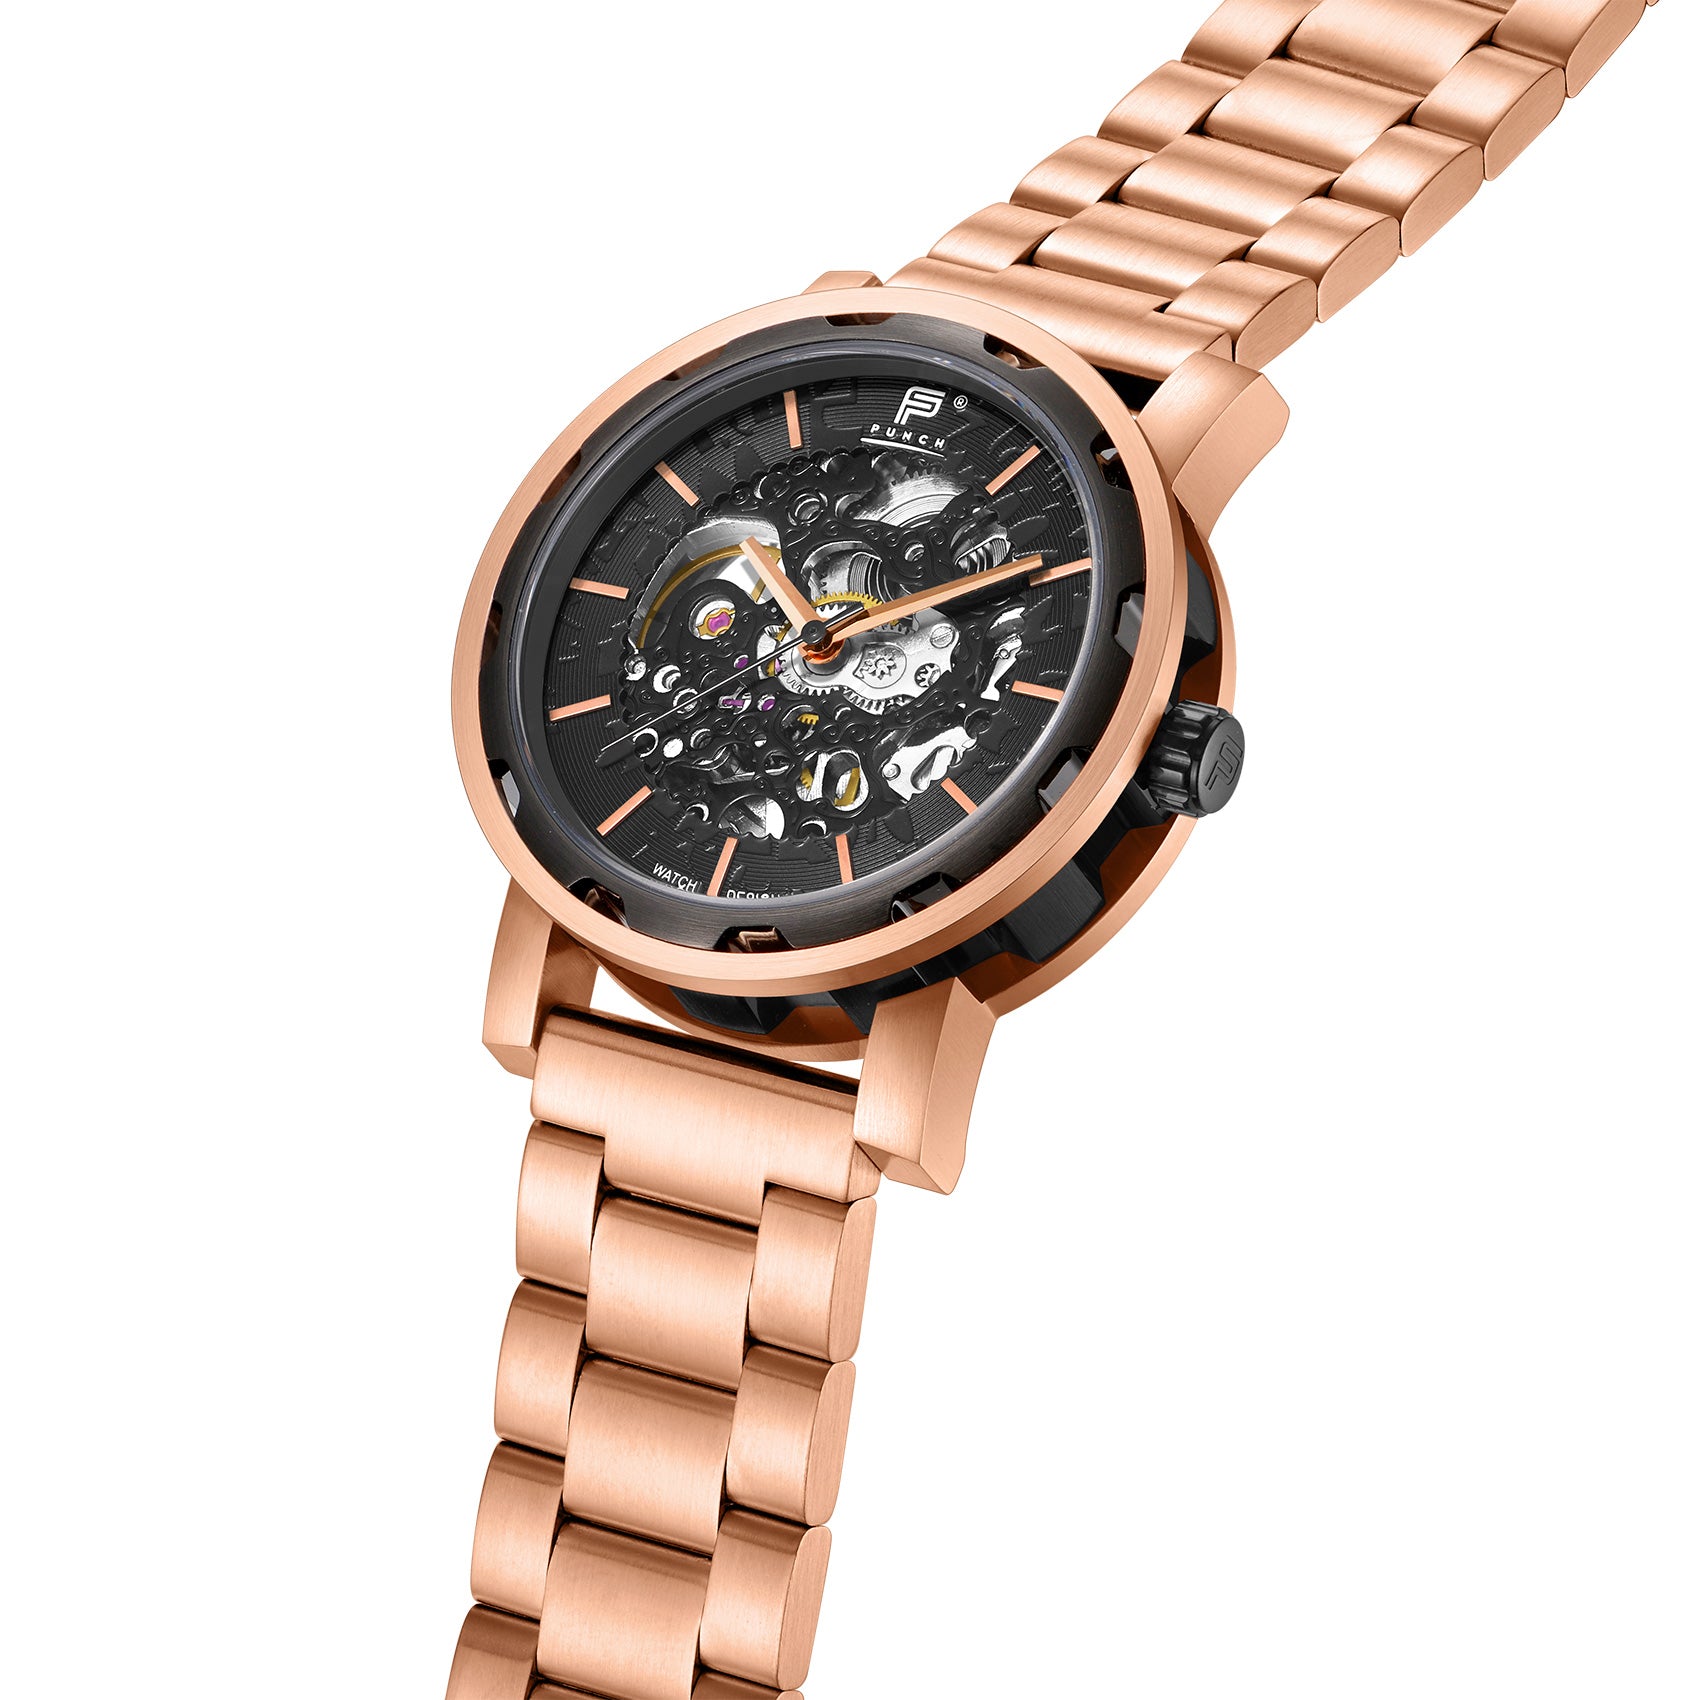 Men's Rose Gold Automatic Skeleton Wrist Watch - Side View